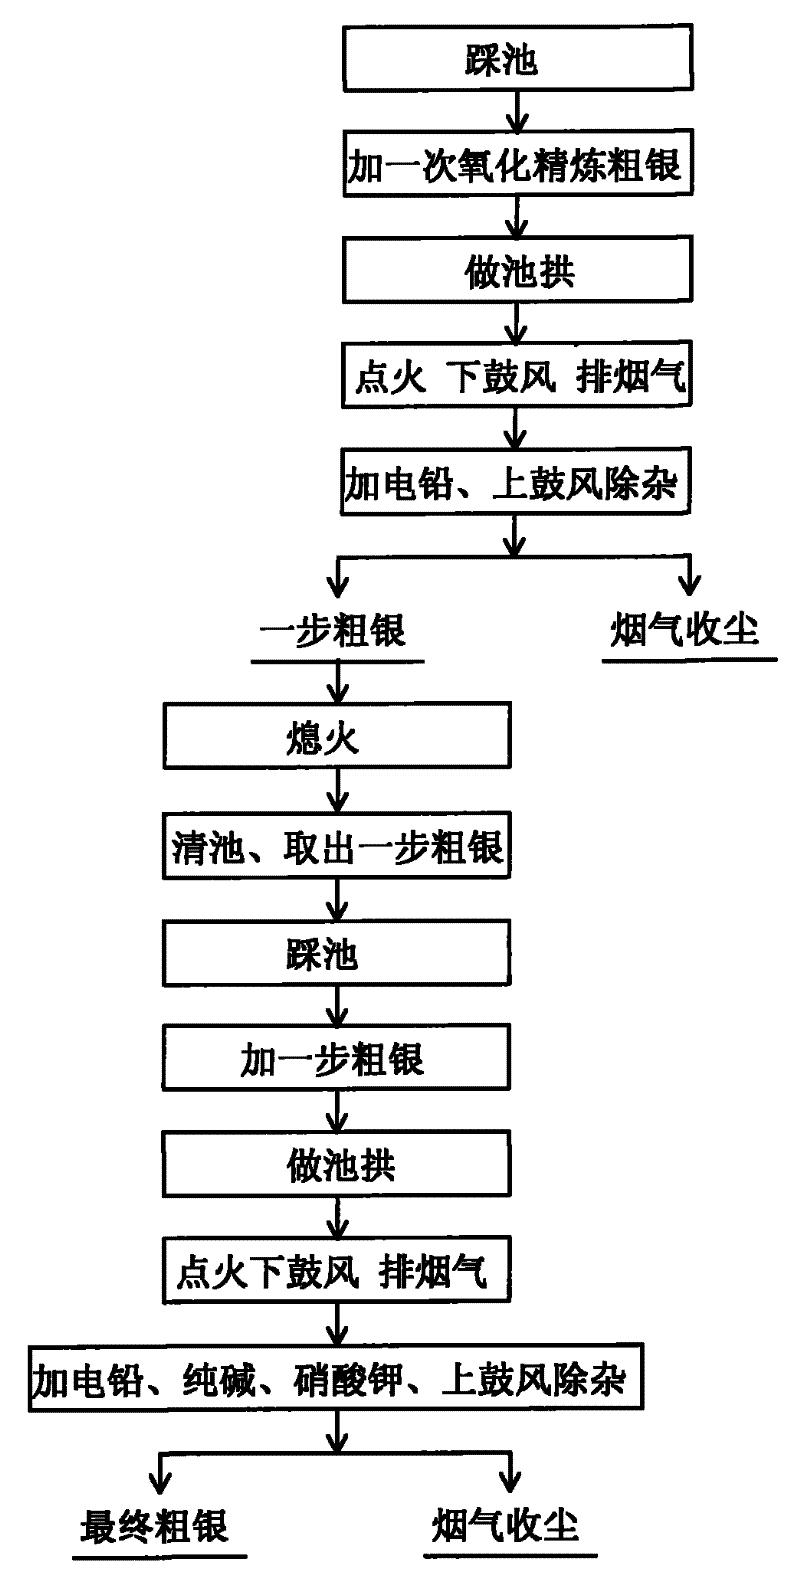 Secondary refining process for silver